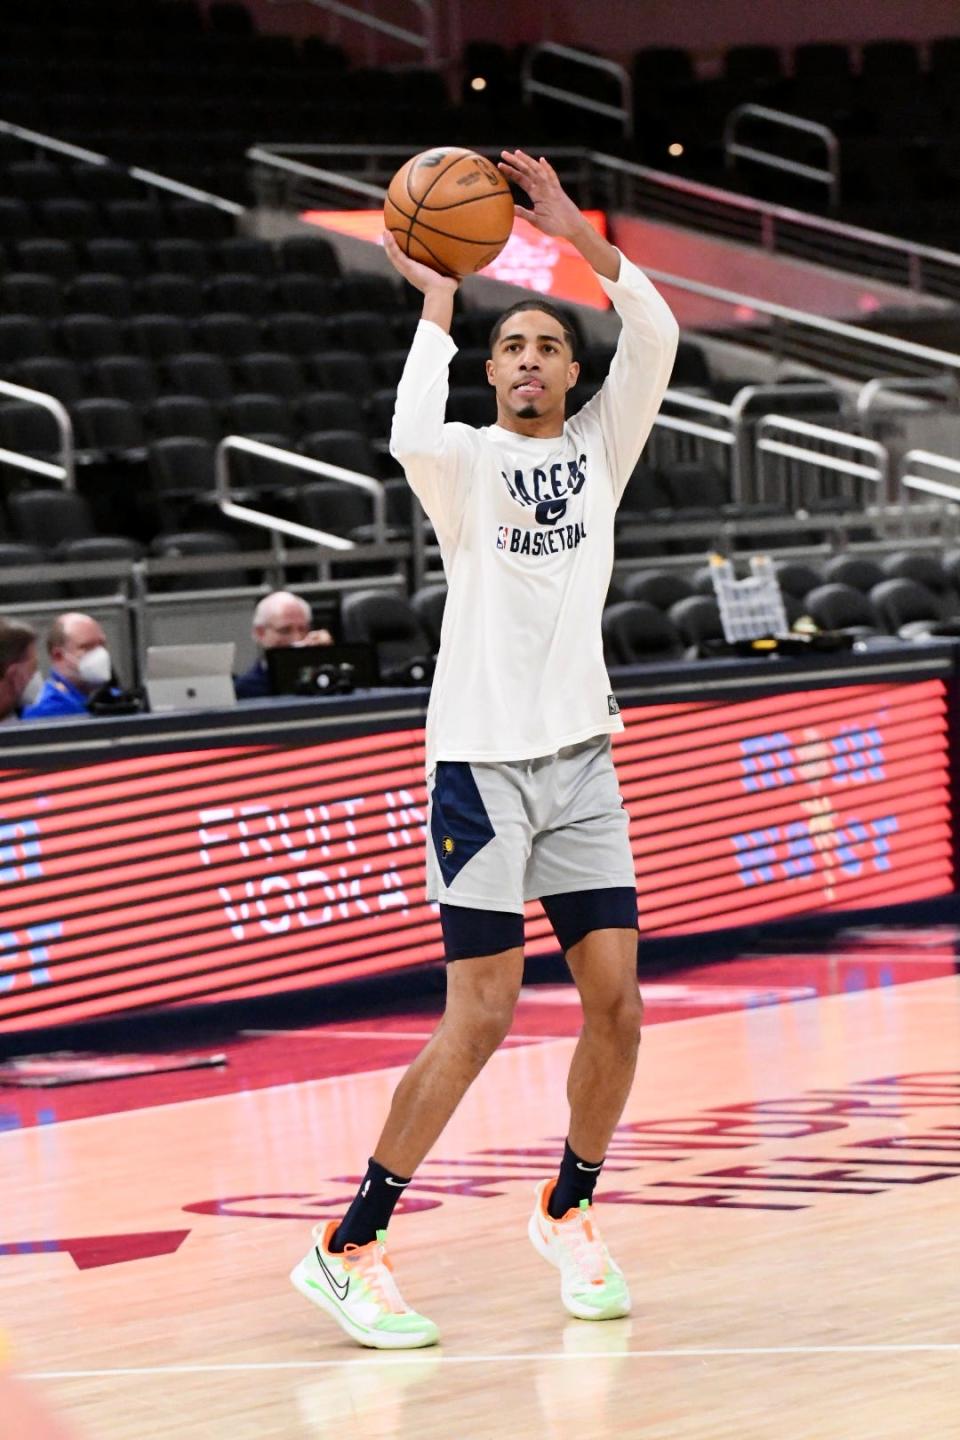 Indiana's Tyrese Haliburton shoots a 3 during warmups as the Pacers host the Wizards at Gainbridge Fieldhouse in Indianapolis on Feb. 16, 2022.